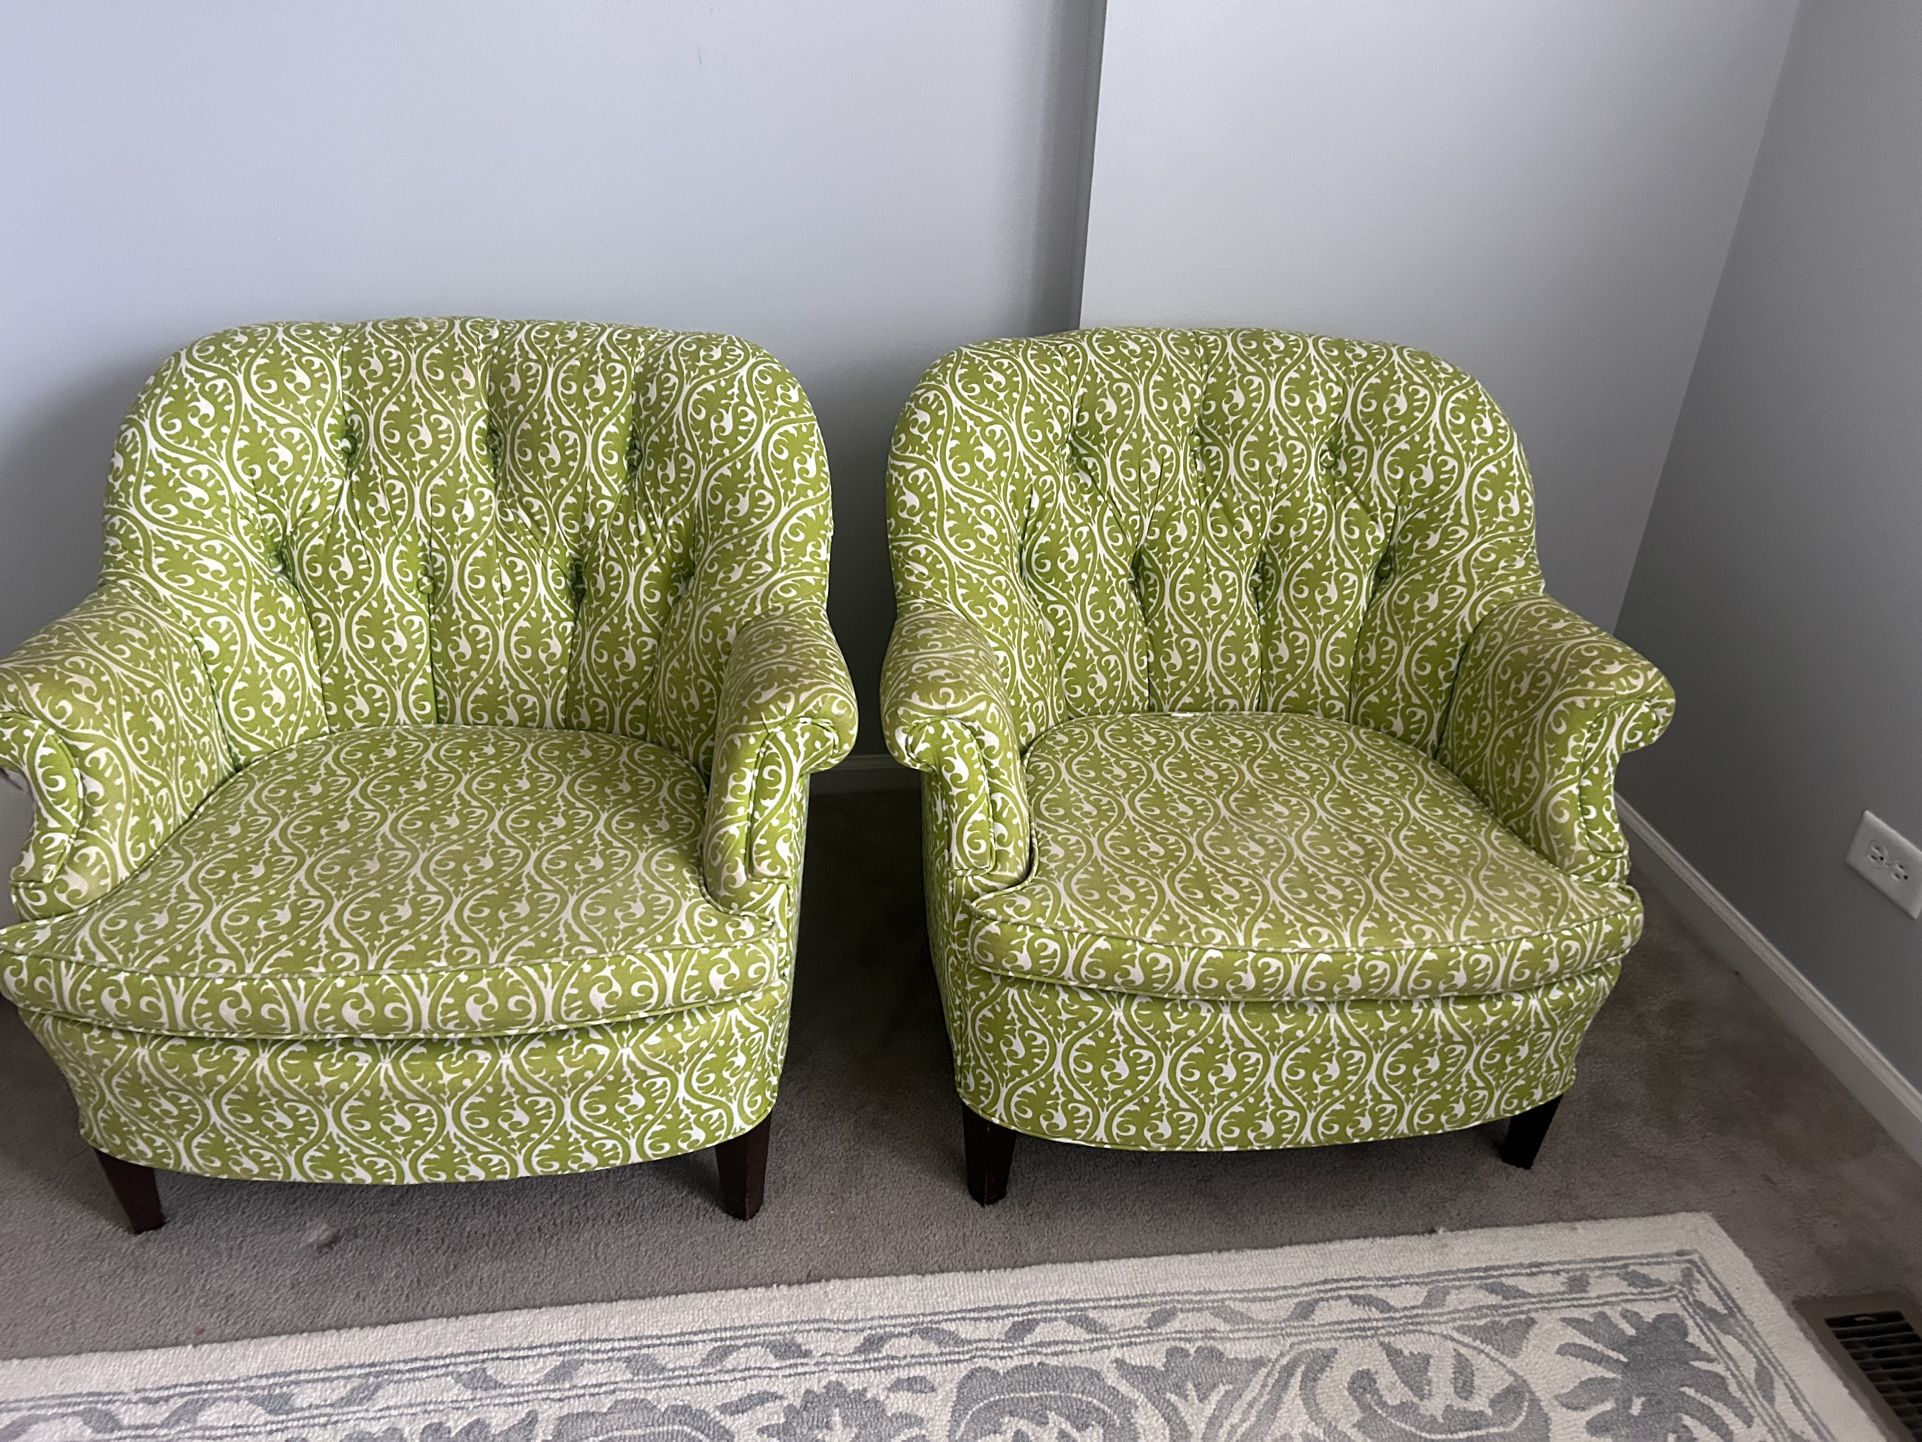 Pair Of Green Tufted Antique Club Chairs